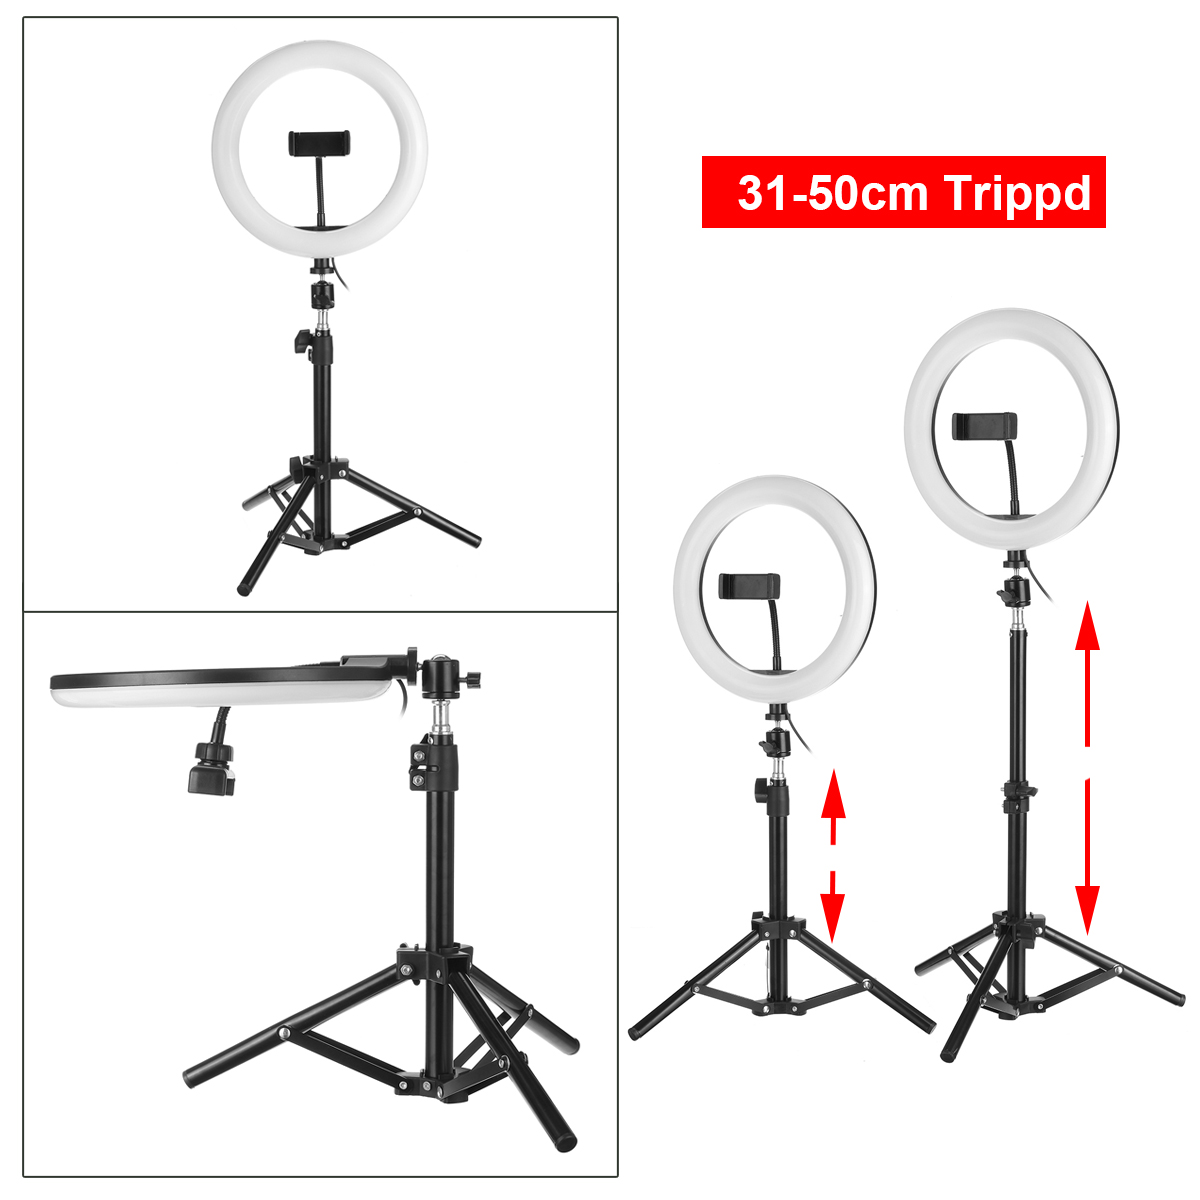 Flashes-Selfie-Lights-LED-Ring-Light-Lamp-Stand-Kit-Dimmable-Photo-Studio-Selfie-Makeup-Lamp-1760877-8